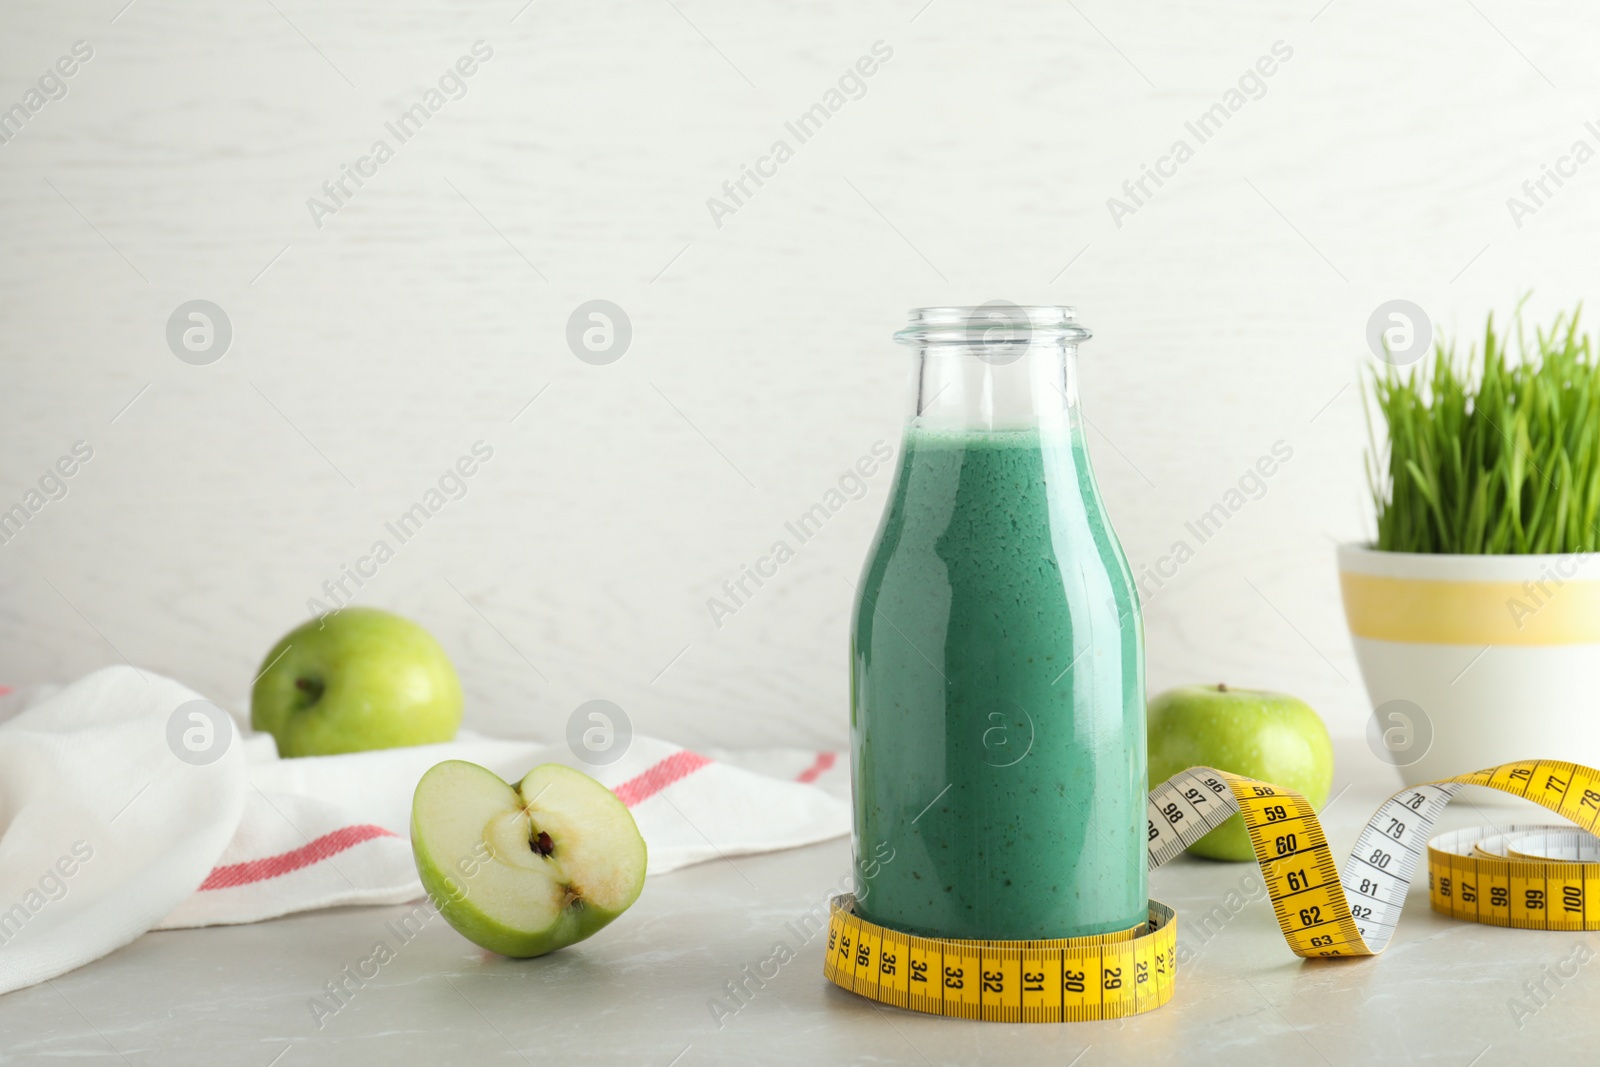 Photo of Composition with bottle of spirulina smoothie, measuring tape and apples on table. Space for text